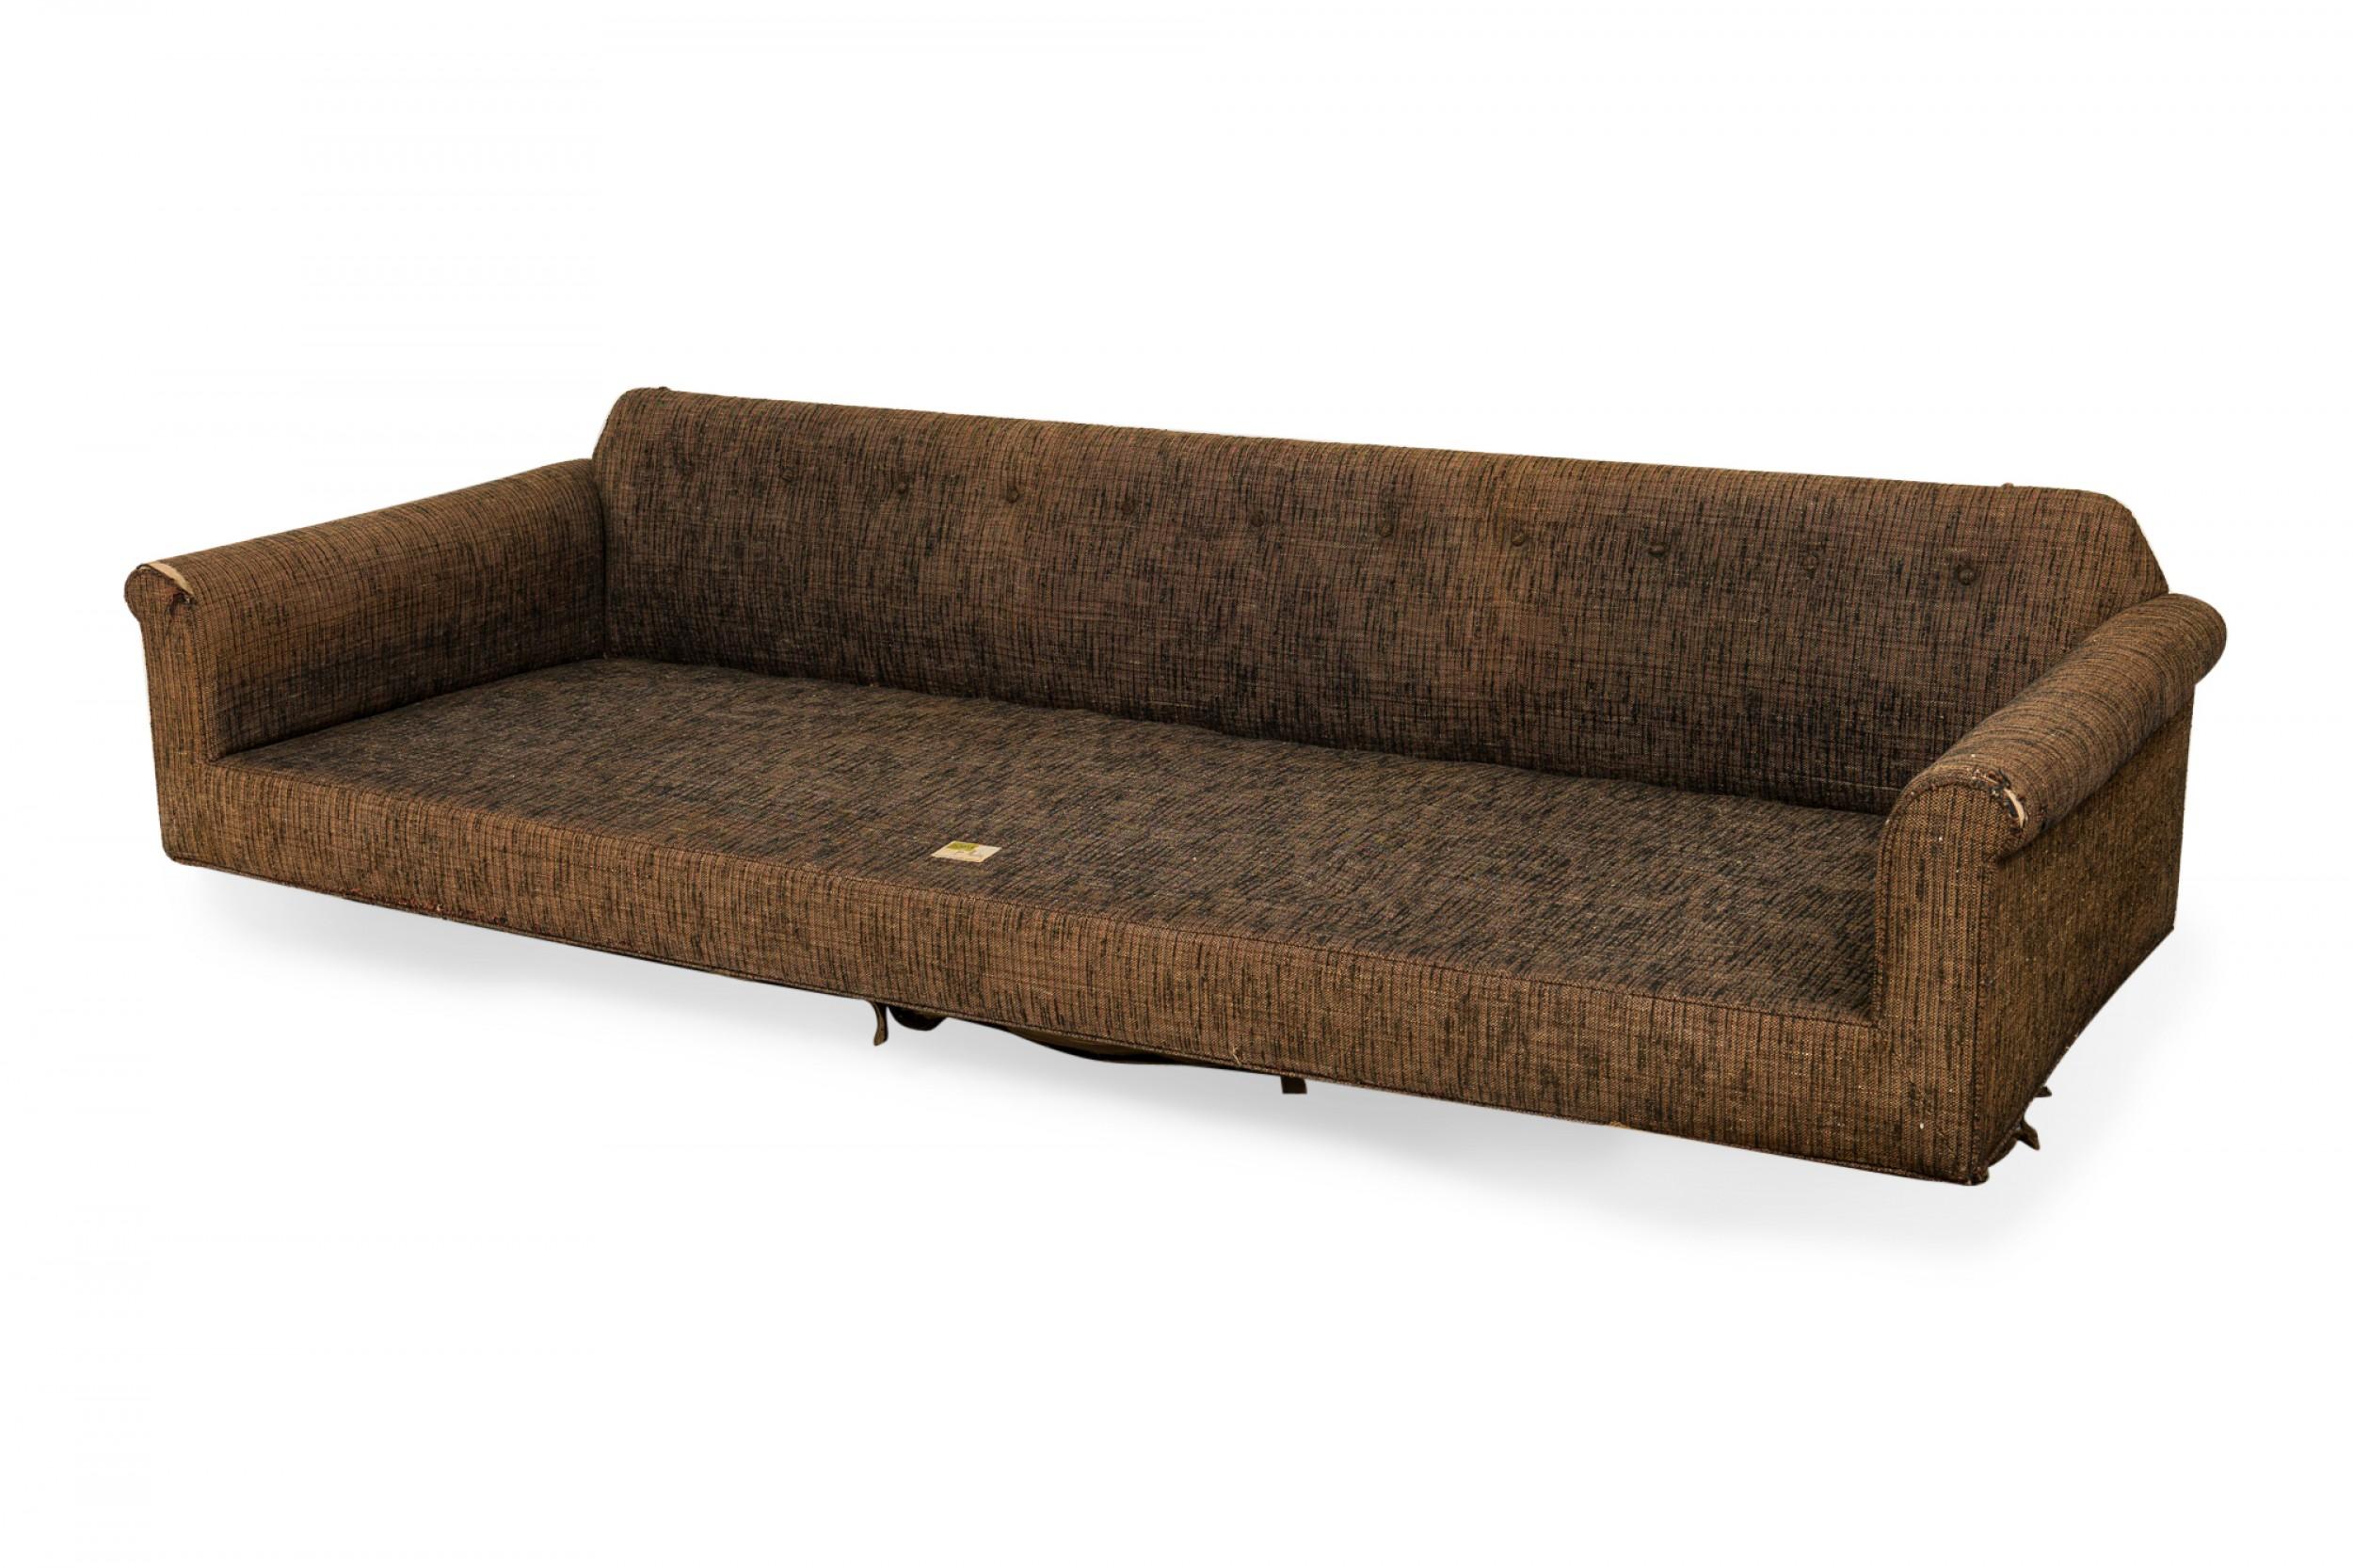 20th Century Edward Wormley 'Big Texan' Oversized Brown Fabric Upholstered Sofa For Sale